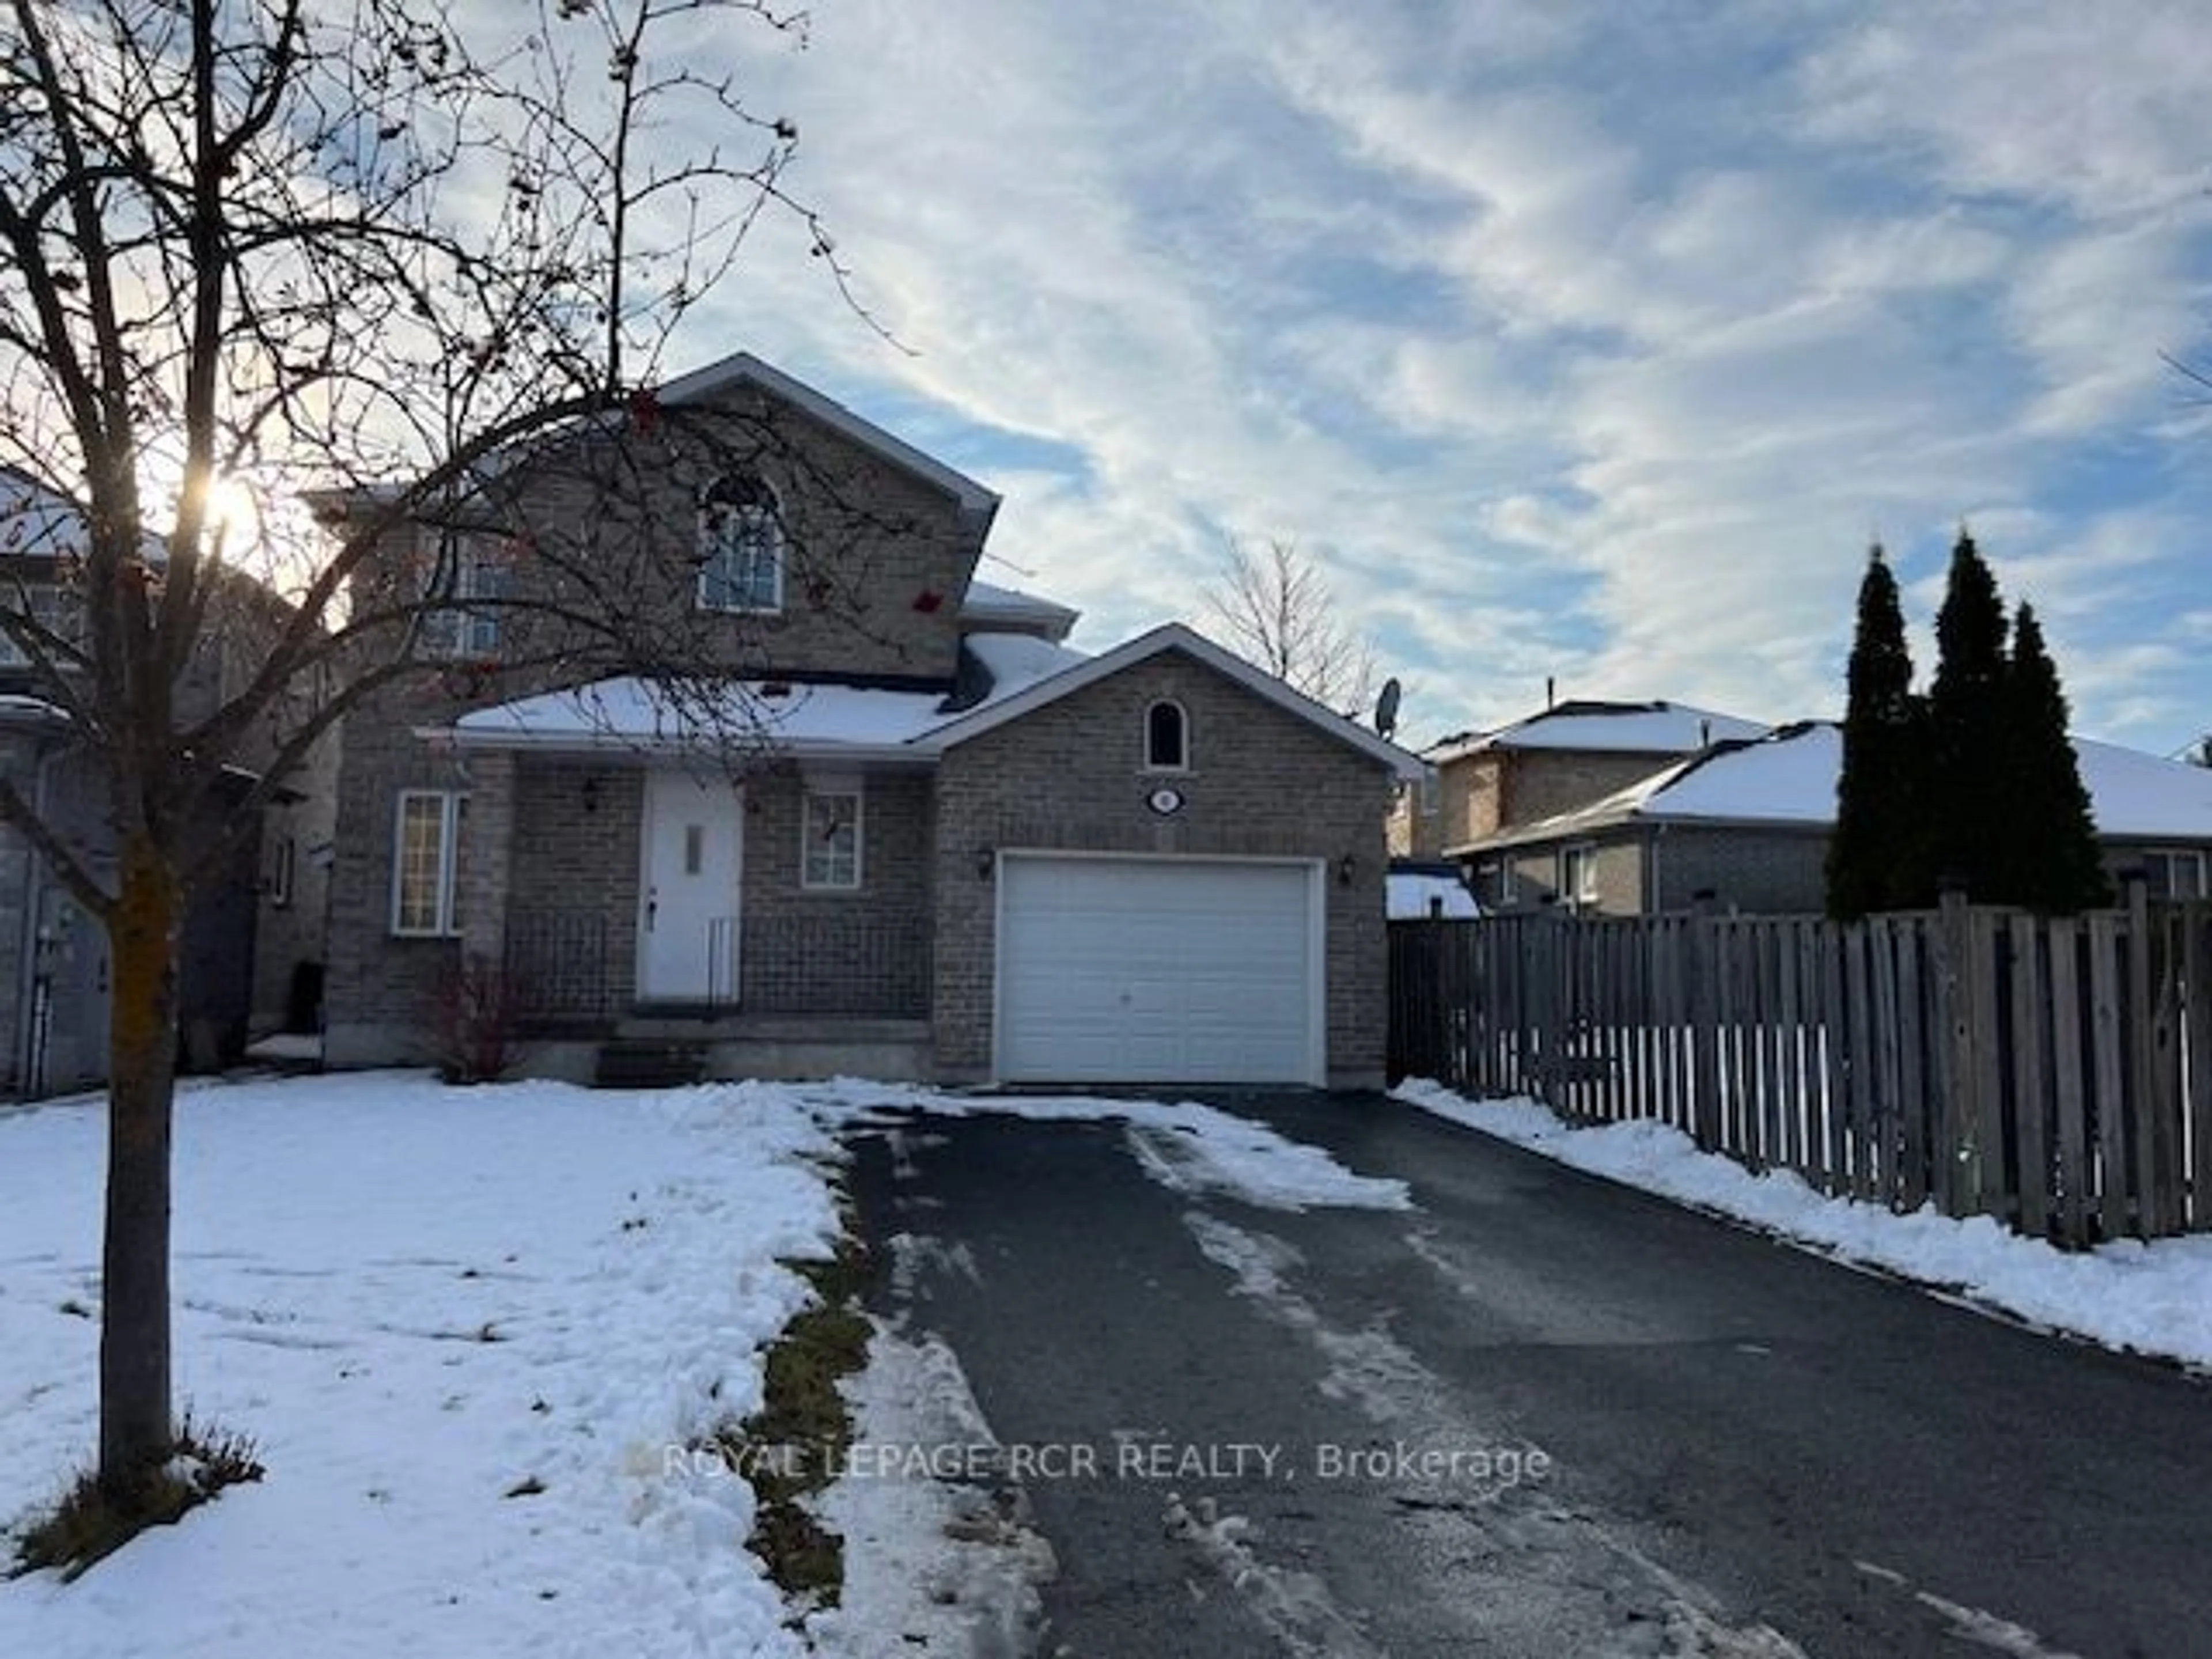 Frontside or backside of a home for 92 Kraus Rd, Barrie Ontario L4N 0N7